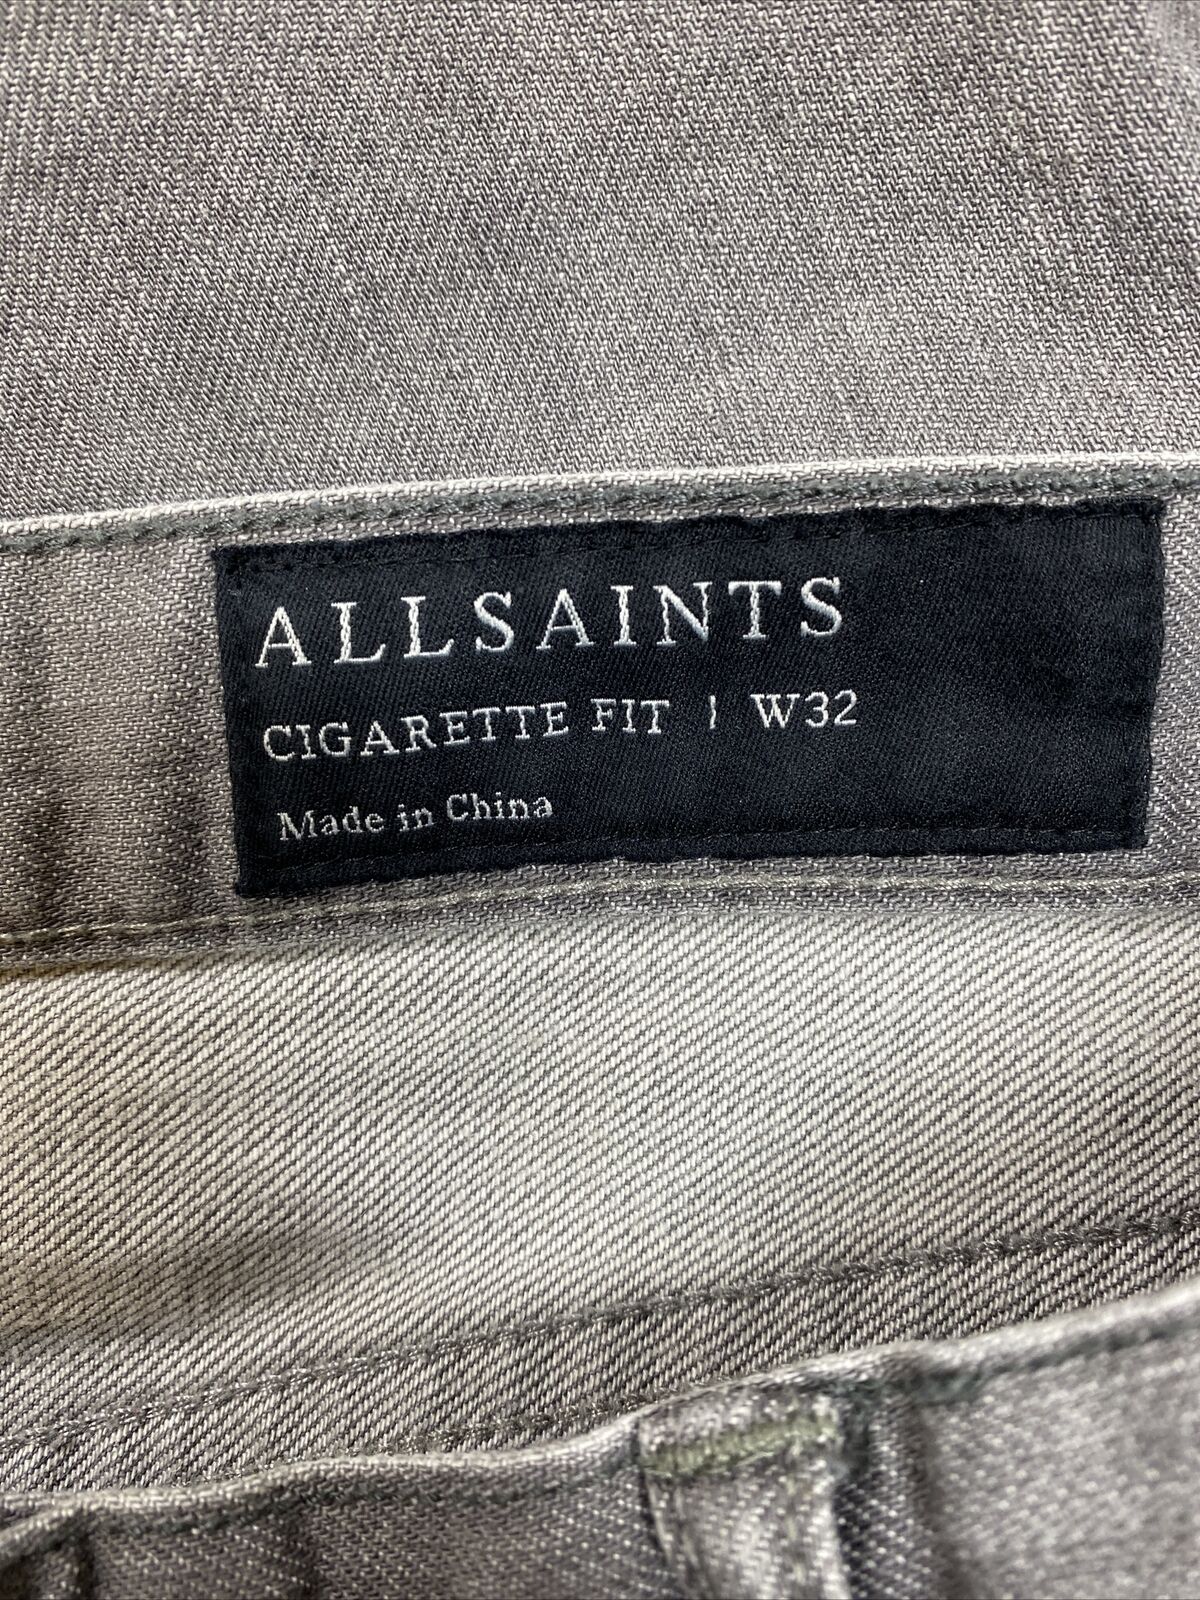 AllSaints Men's Gray Button Fly Cigarette Distressed Skinny Jeans - 32